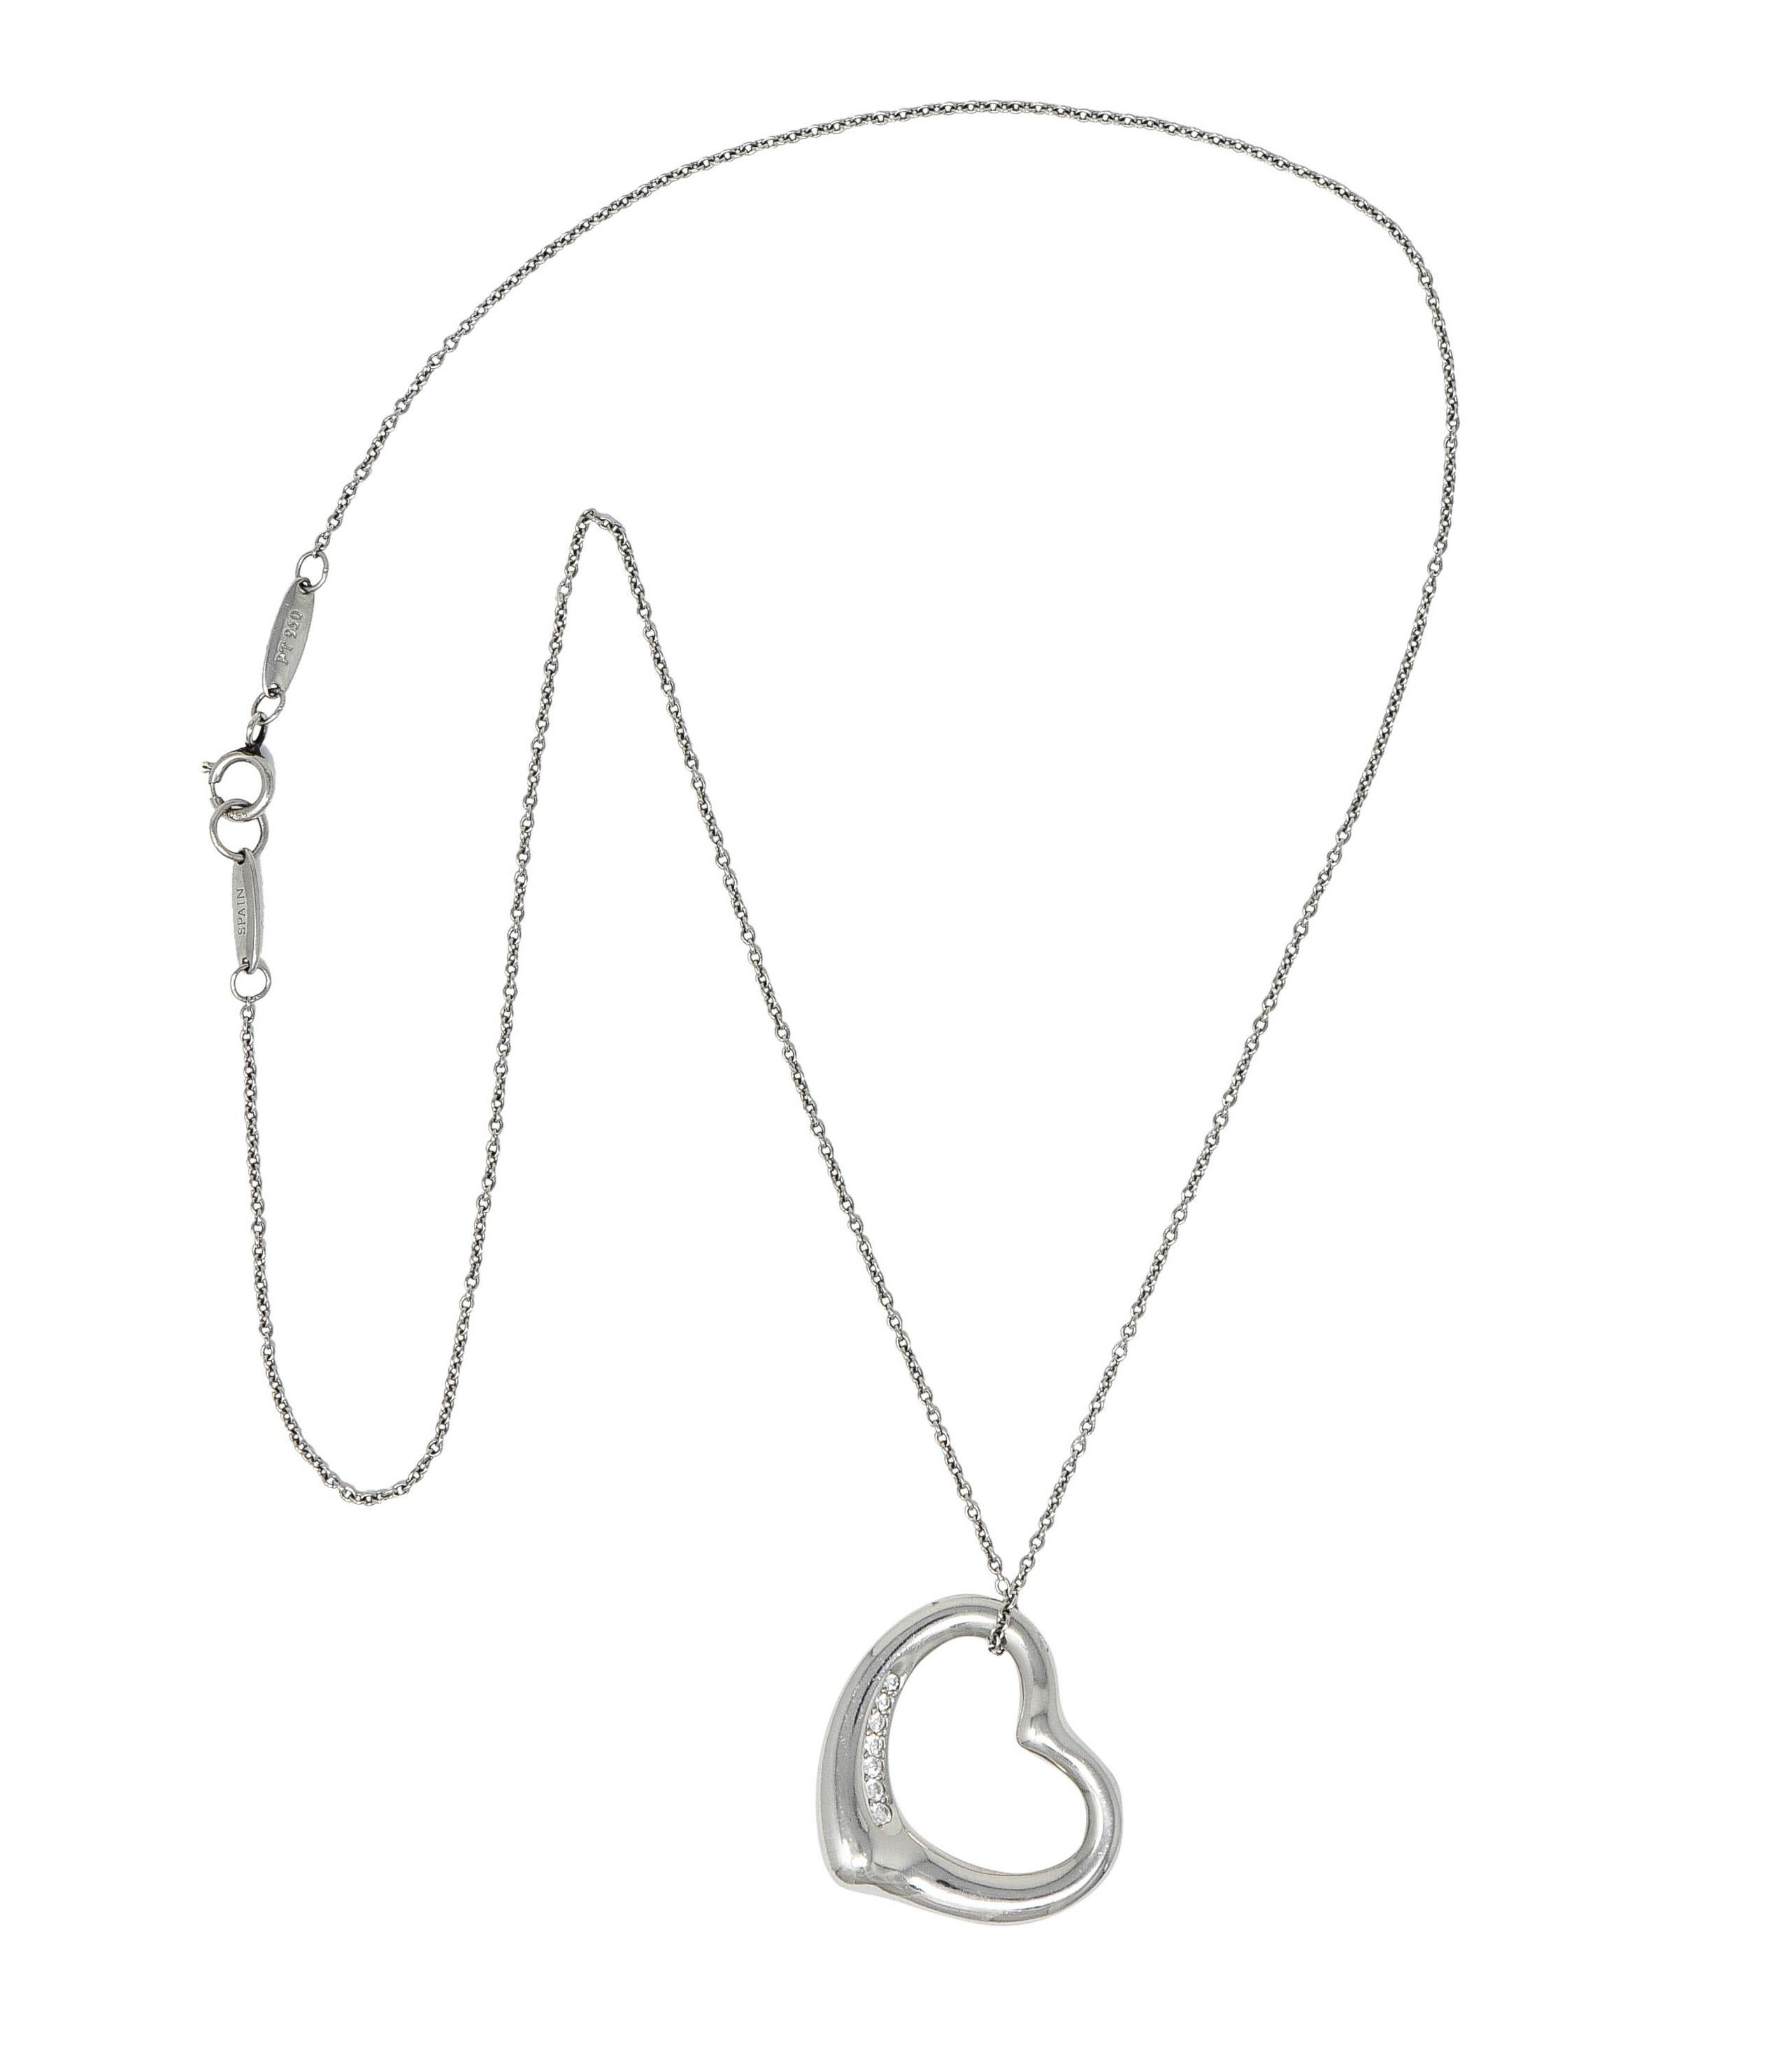 Pendant is designed as the iconic open heart motif

Accented by a bead set round brilliant cut diamonds weighing in total approximately 0.12 carat - eye clean and white

Suspending from a classic cable chain necklace - completed by a spring ring